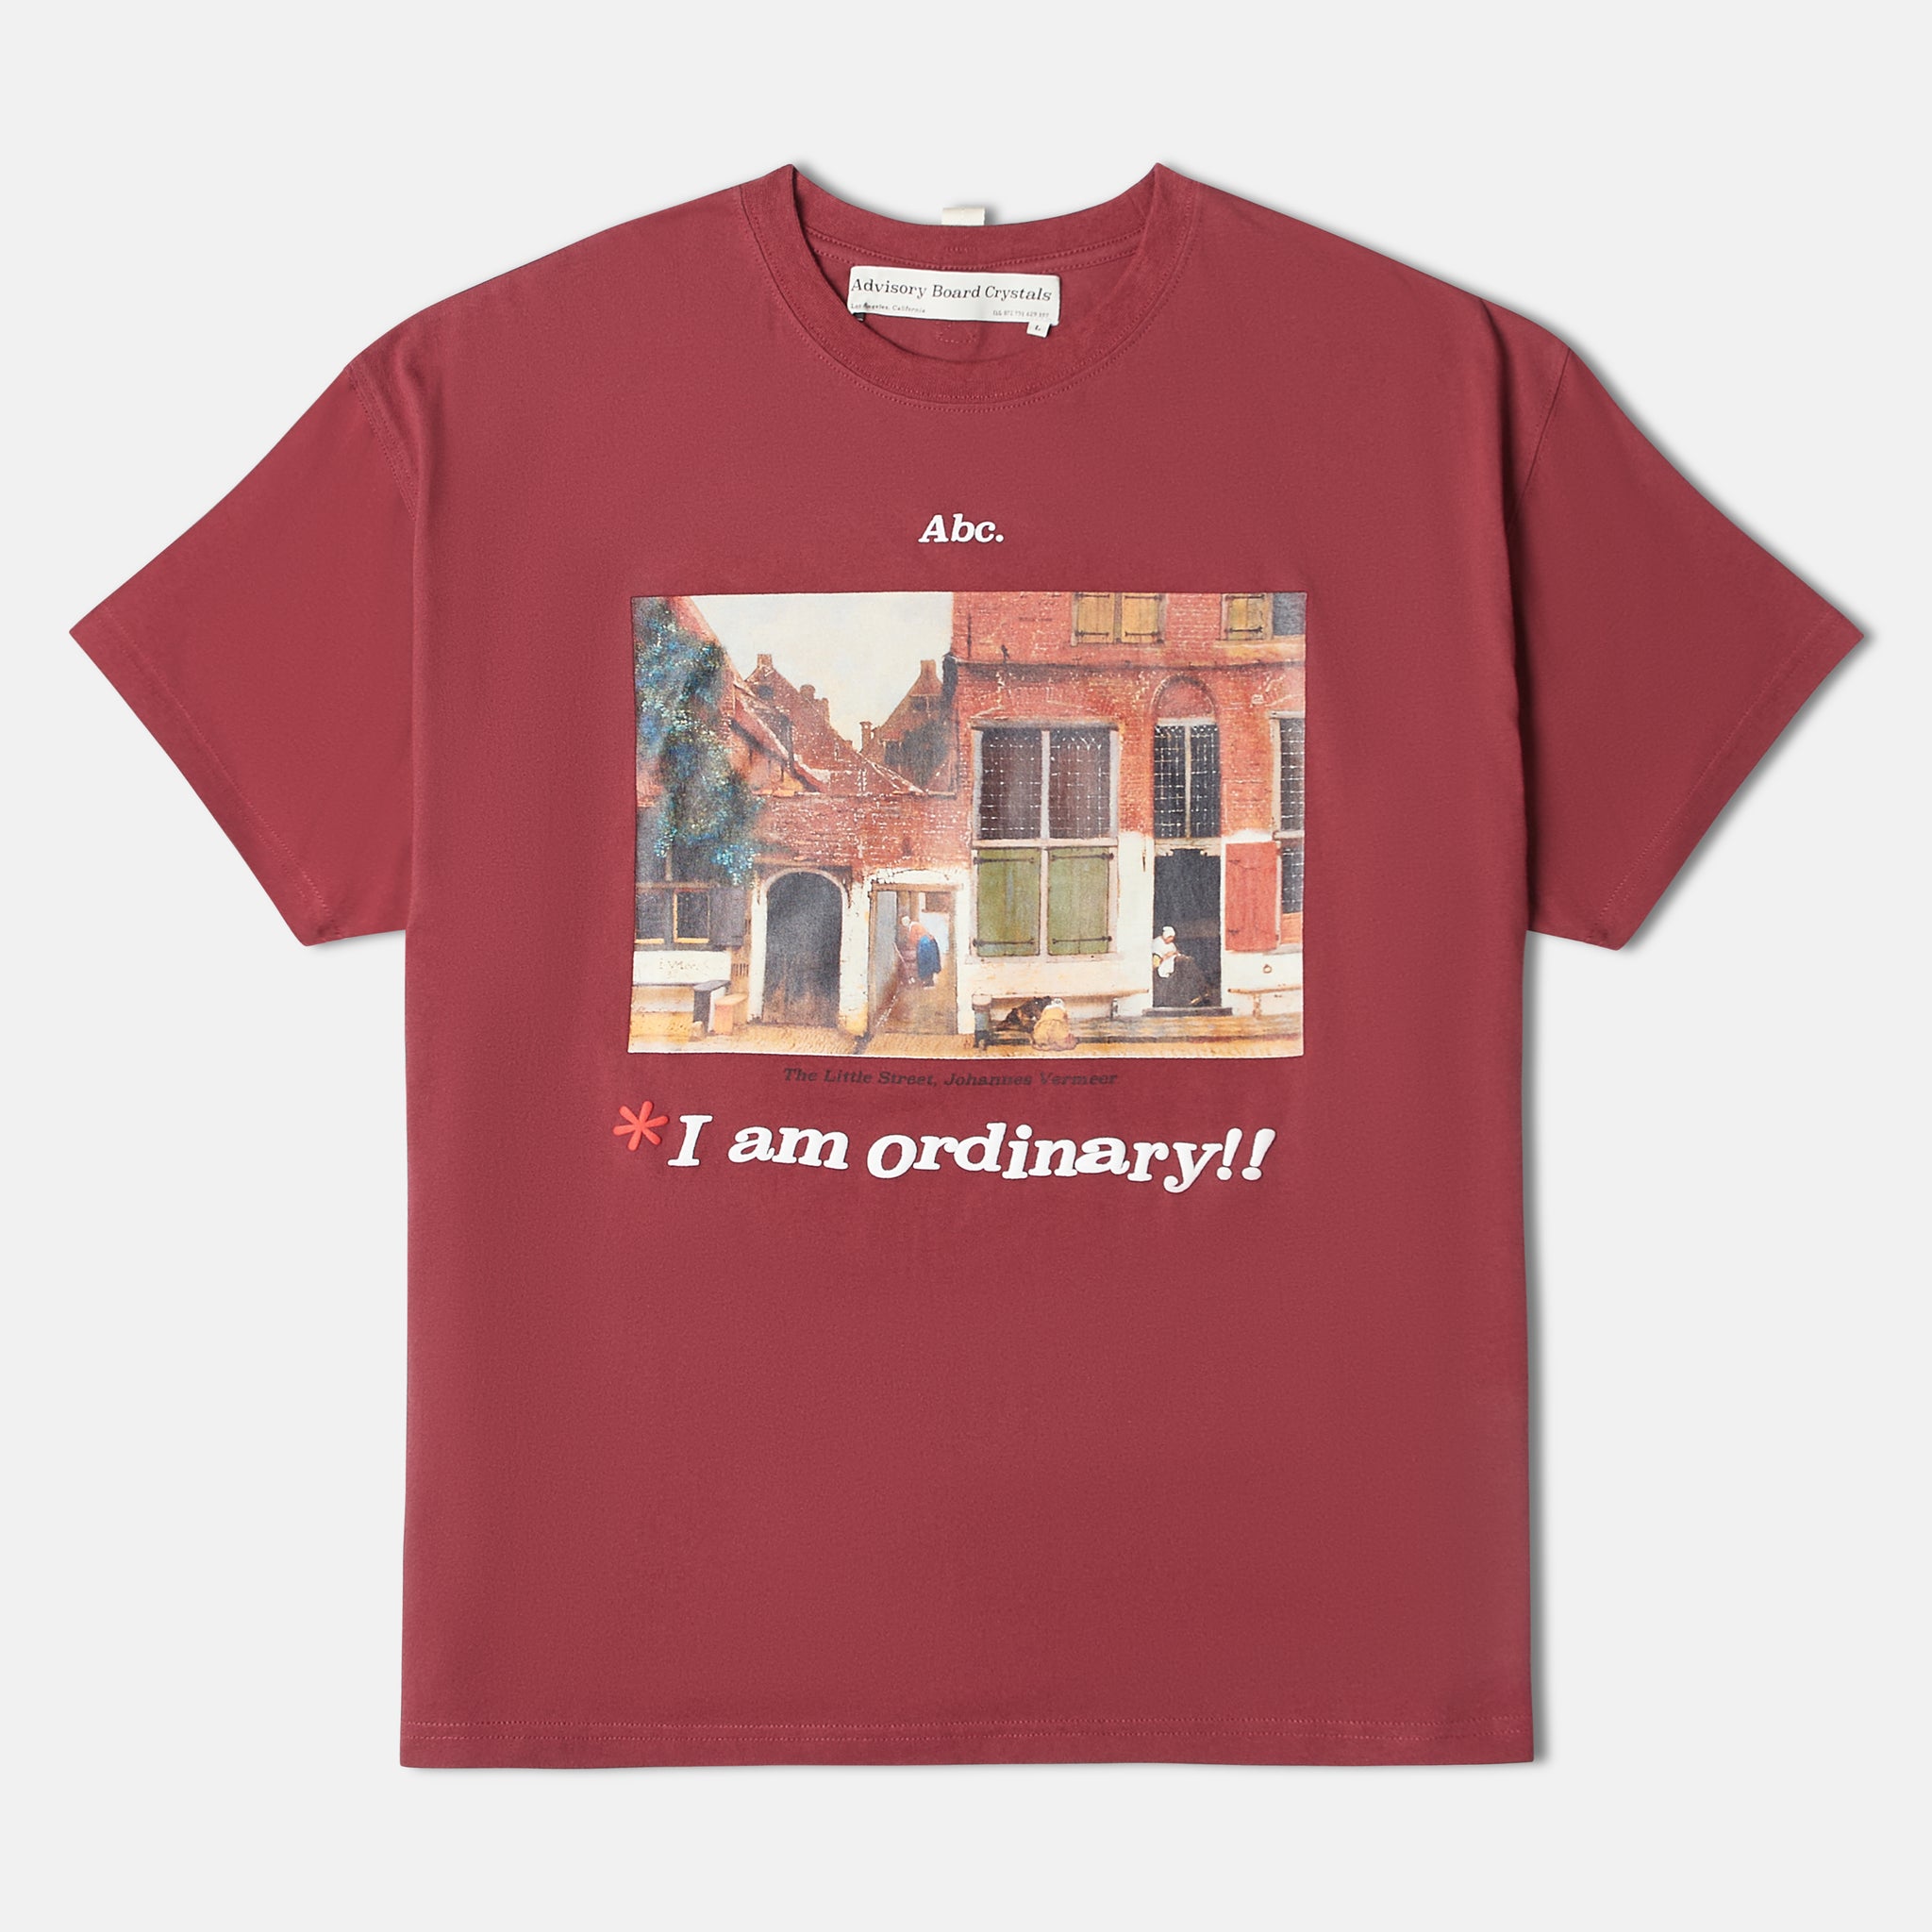 Abc. "I am Ordinary" SS T-Shirt - Oxblood Red